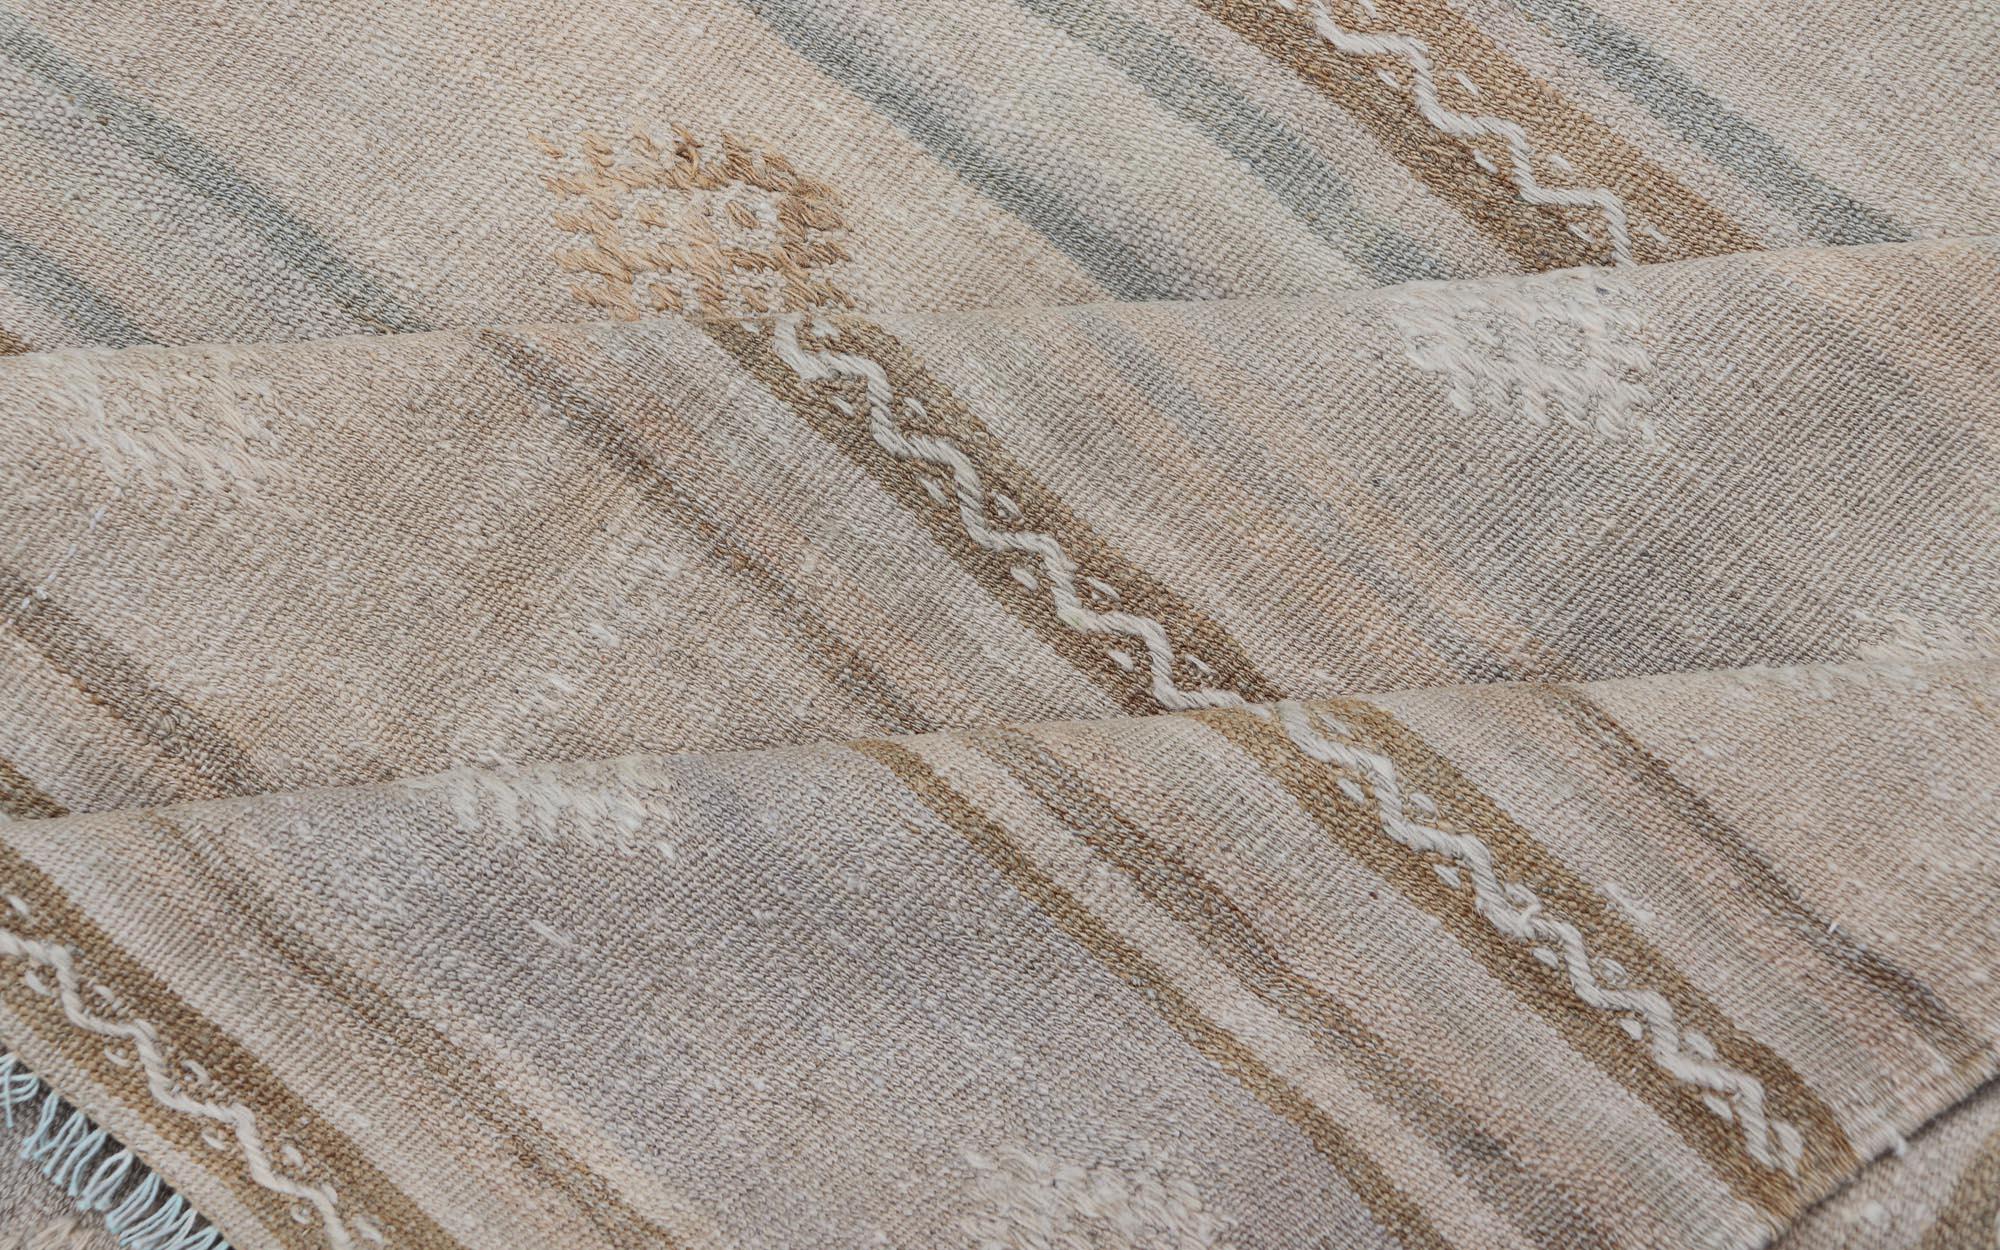 Turkish Flat-Weave Embroideries Kilim in Tan, Taupe, Brown and a Soft Blue For Sale 5